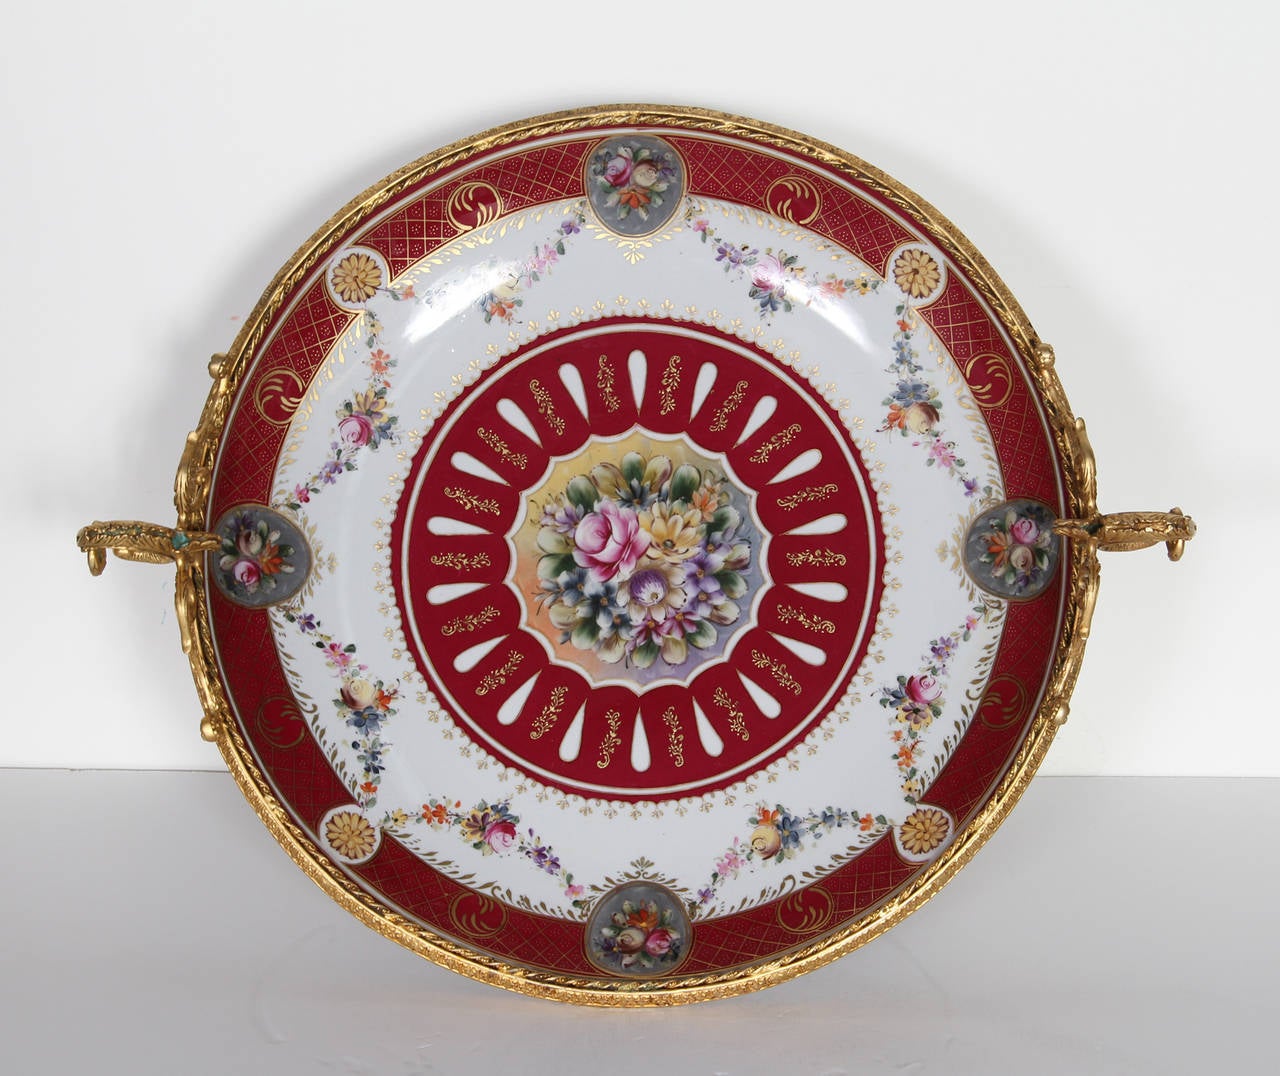 Unknown Still-Life Sculpture - Service Plate (Red)